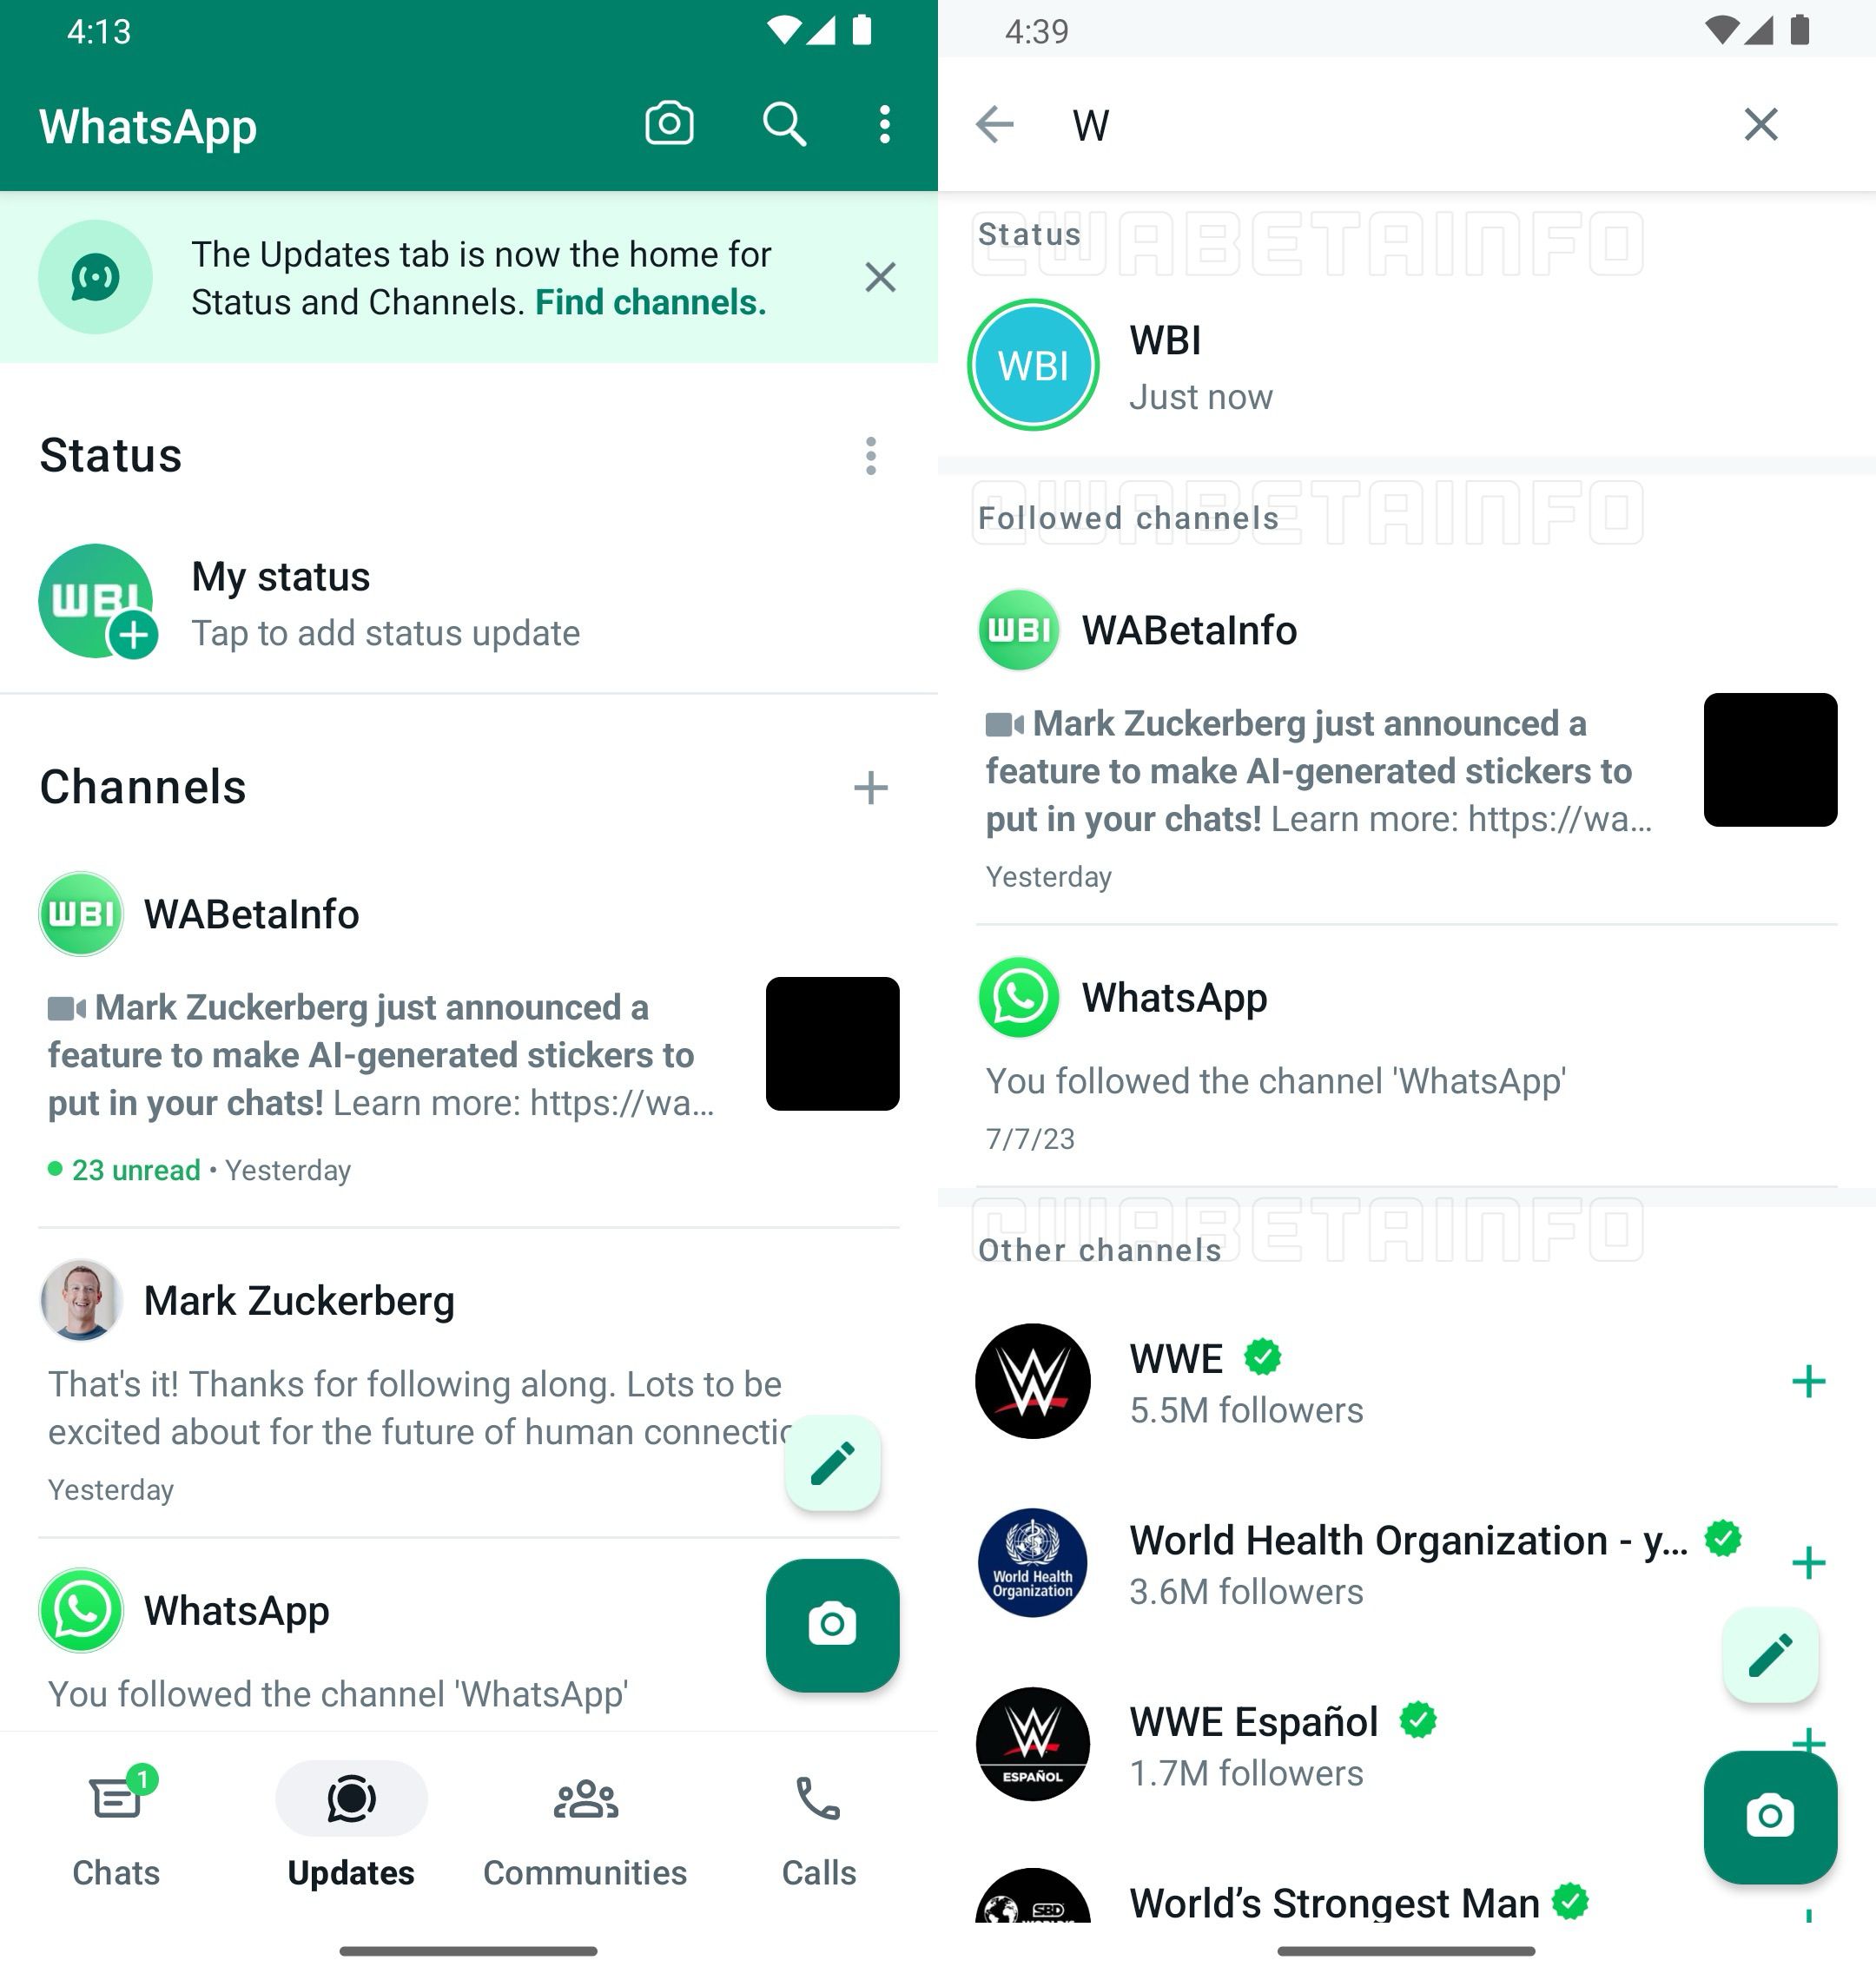 Search in WhatsApp Updates section